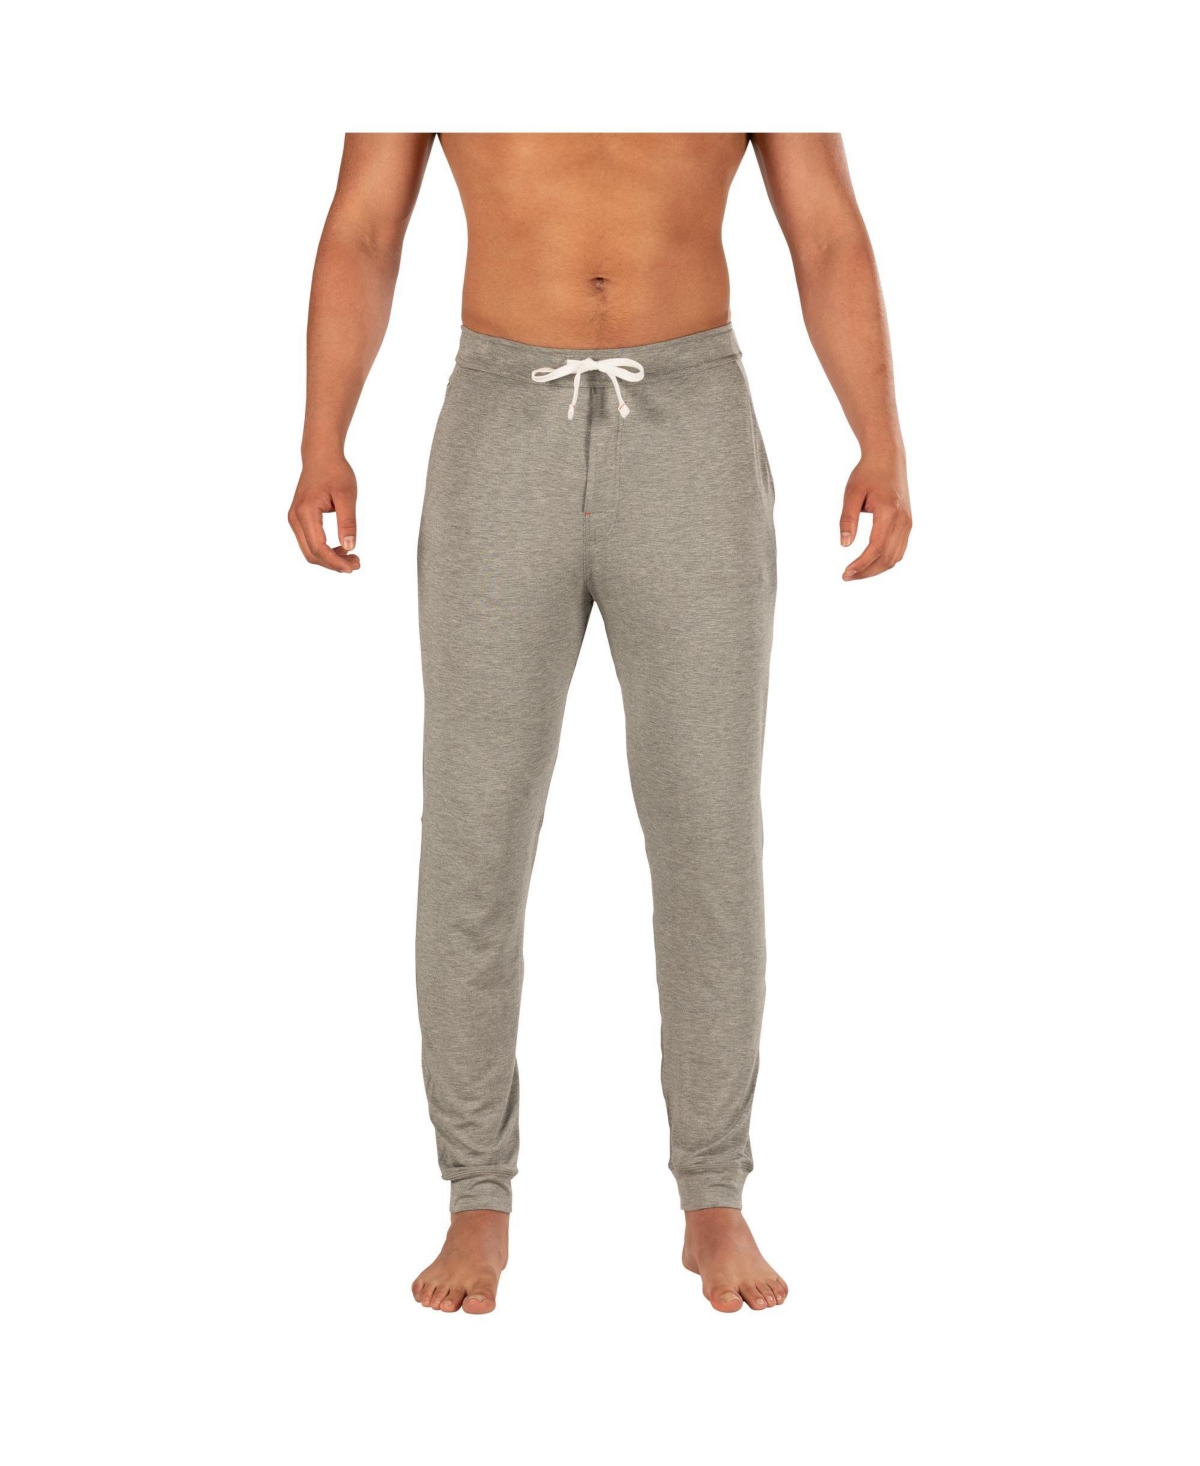 Saxx Men's Snooze Relaxed Fit Sleep Pants In Dark Gray Heather